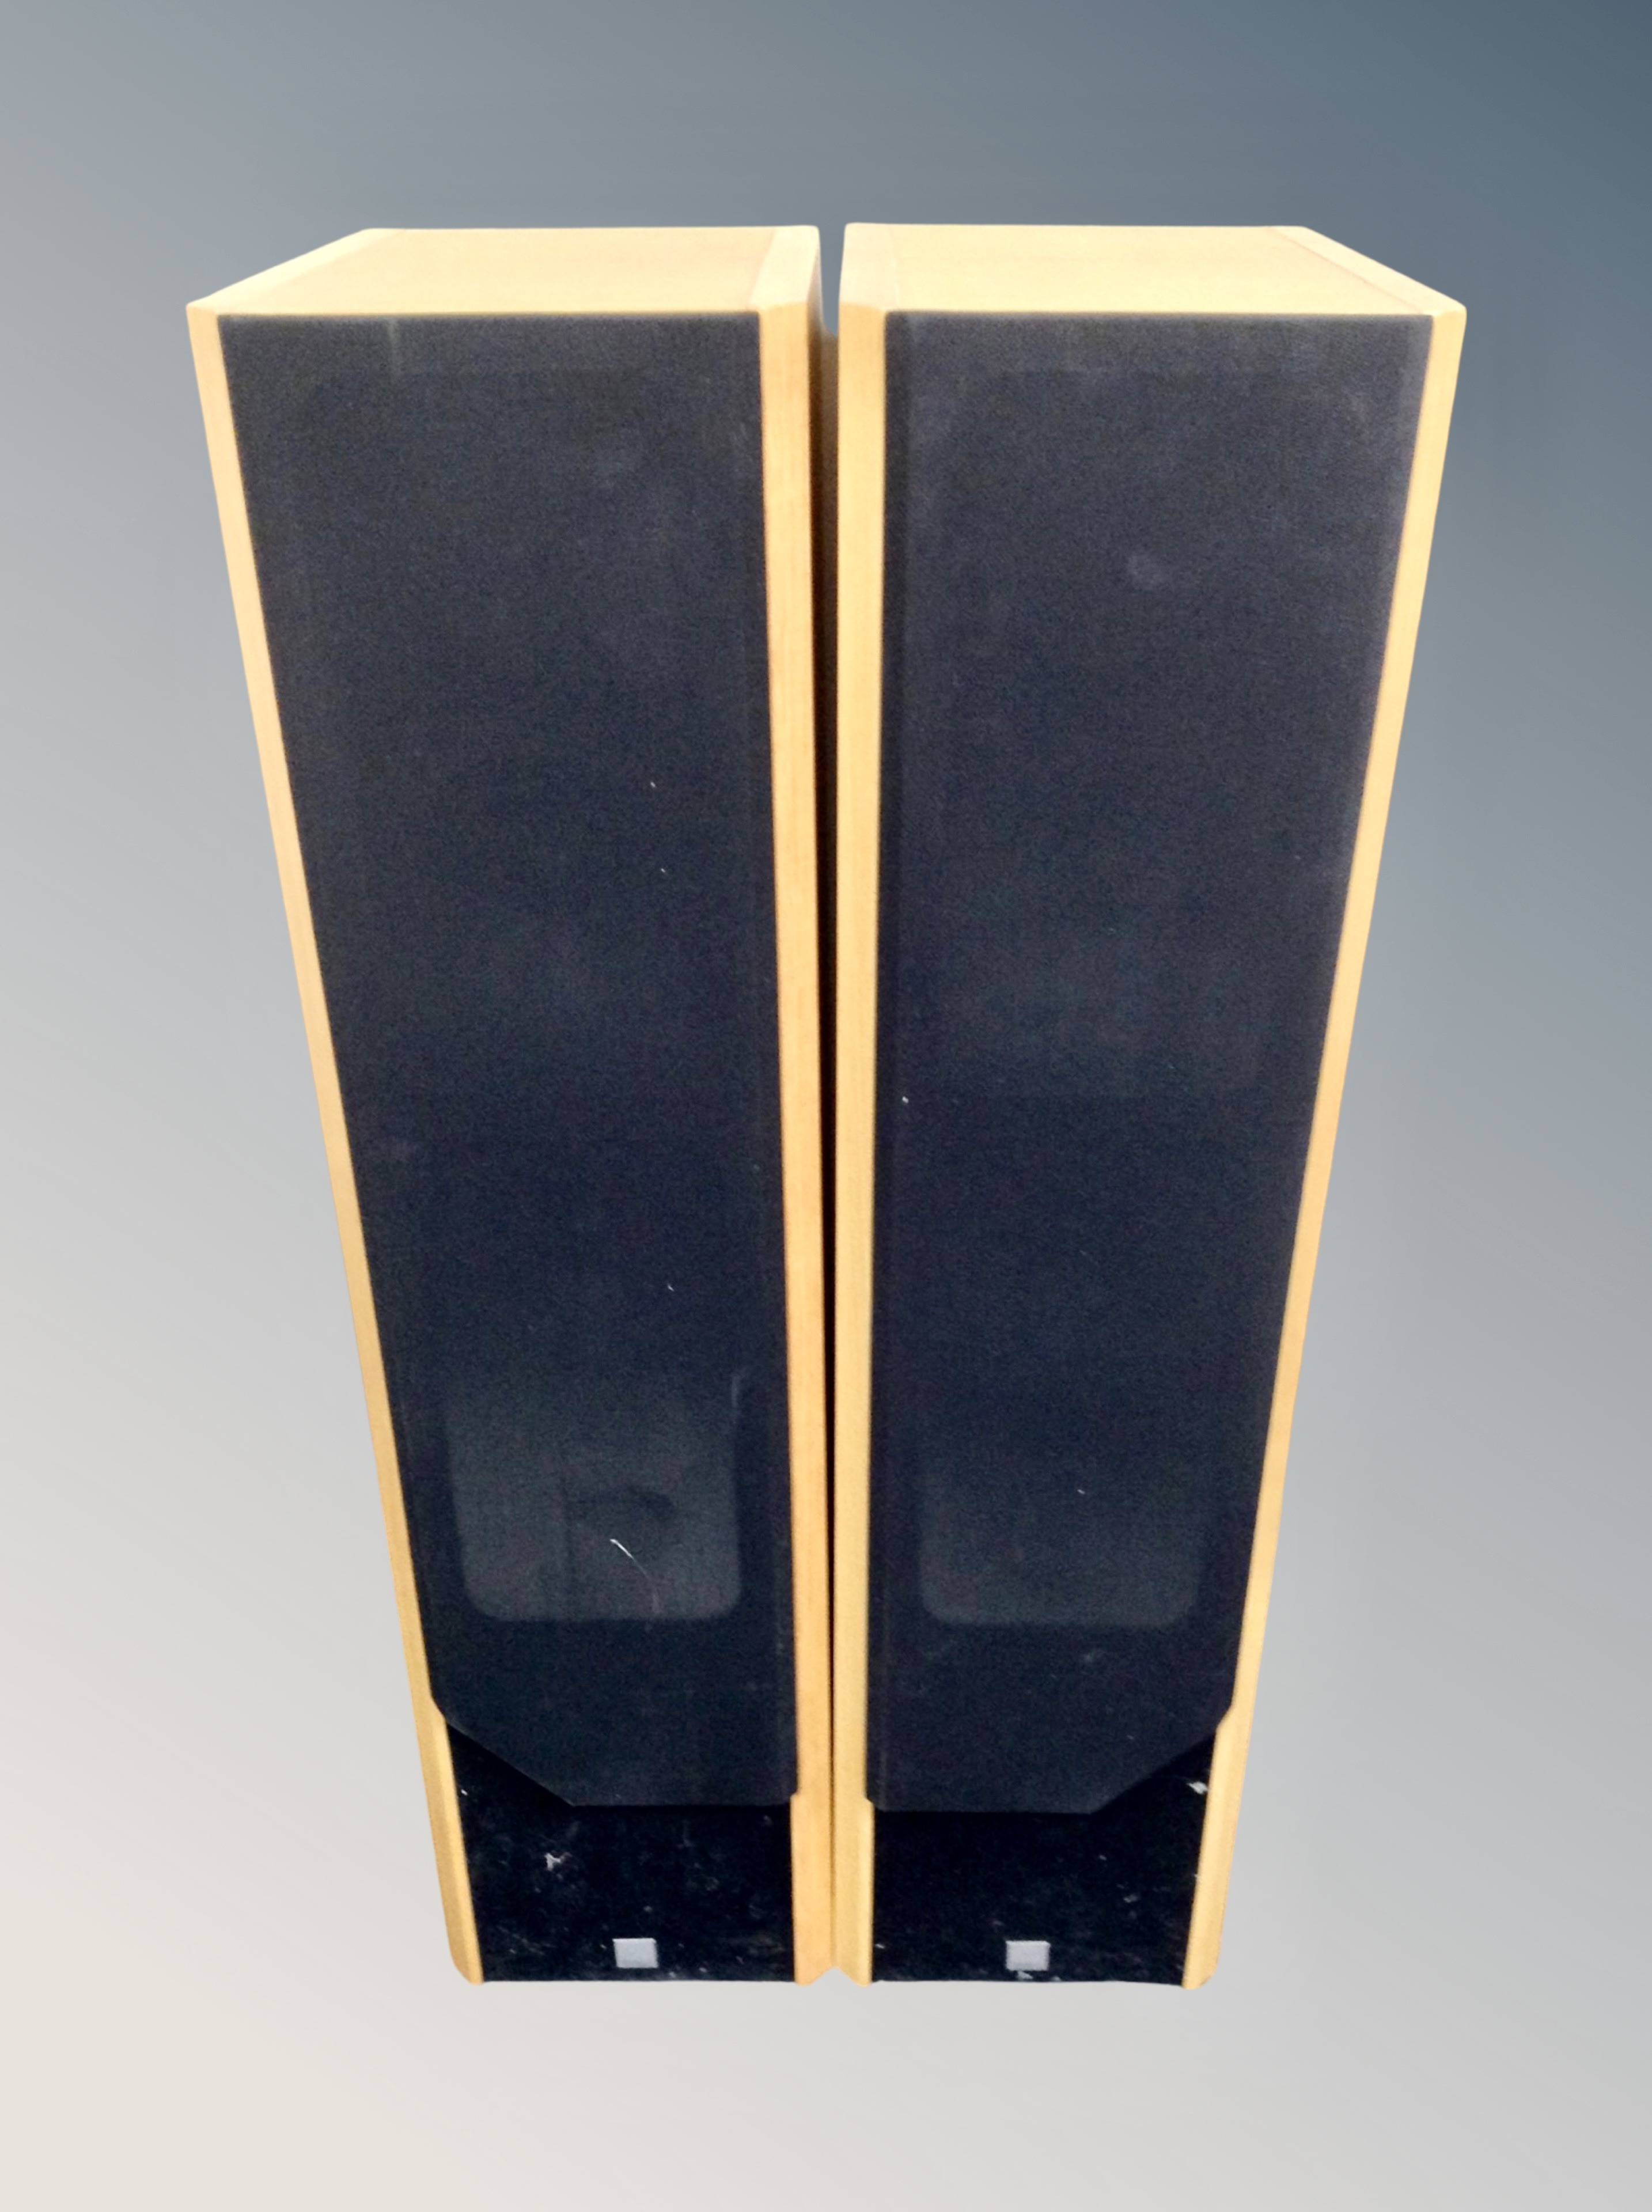 A pair of Dali floor standing speakers (no leads).